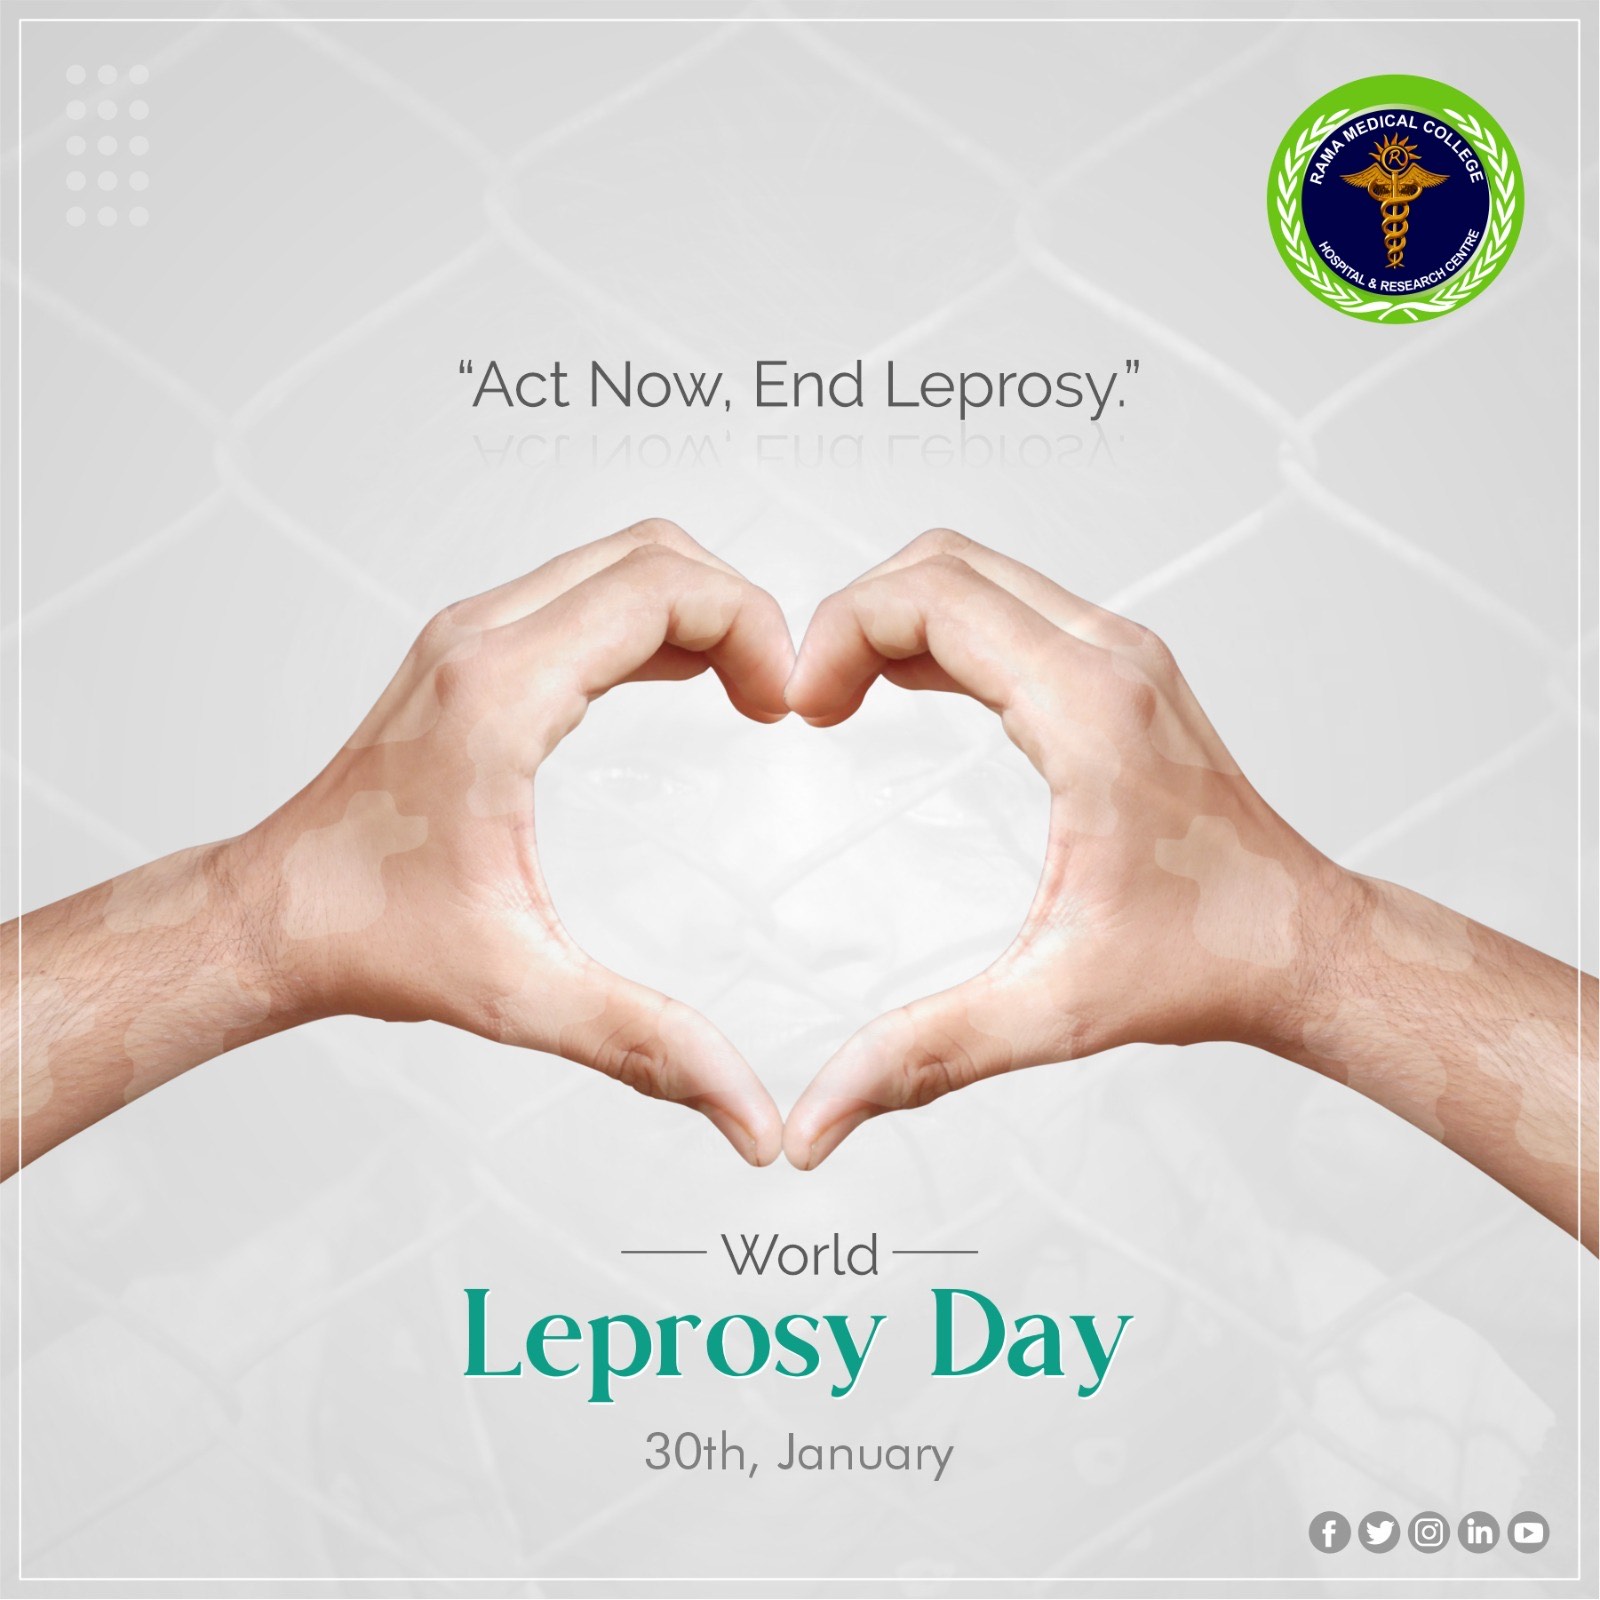 World Leprosy Day- Act Now. End Leprosy